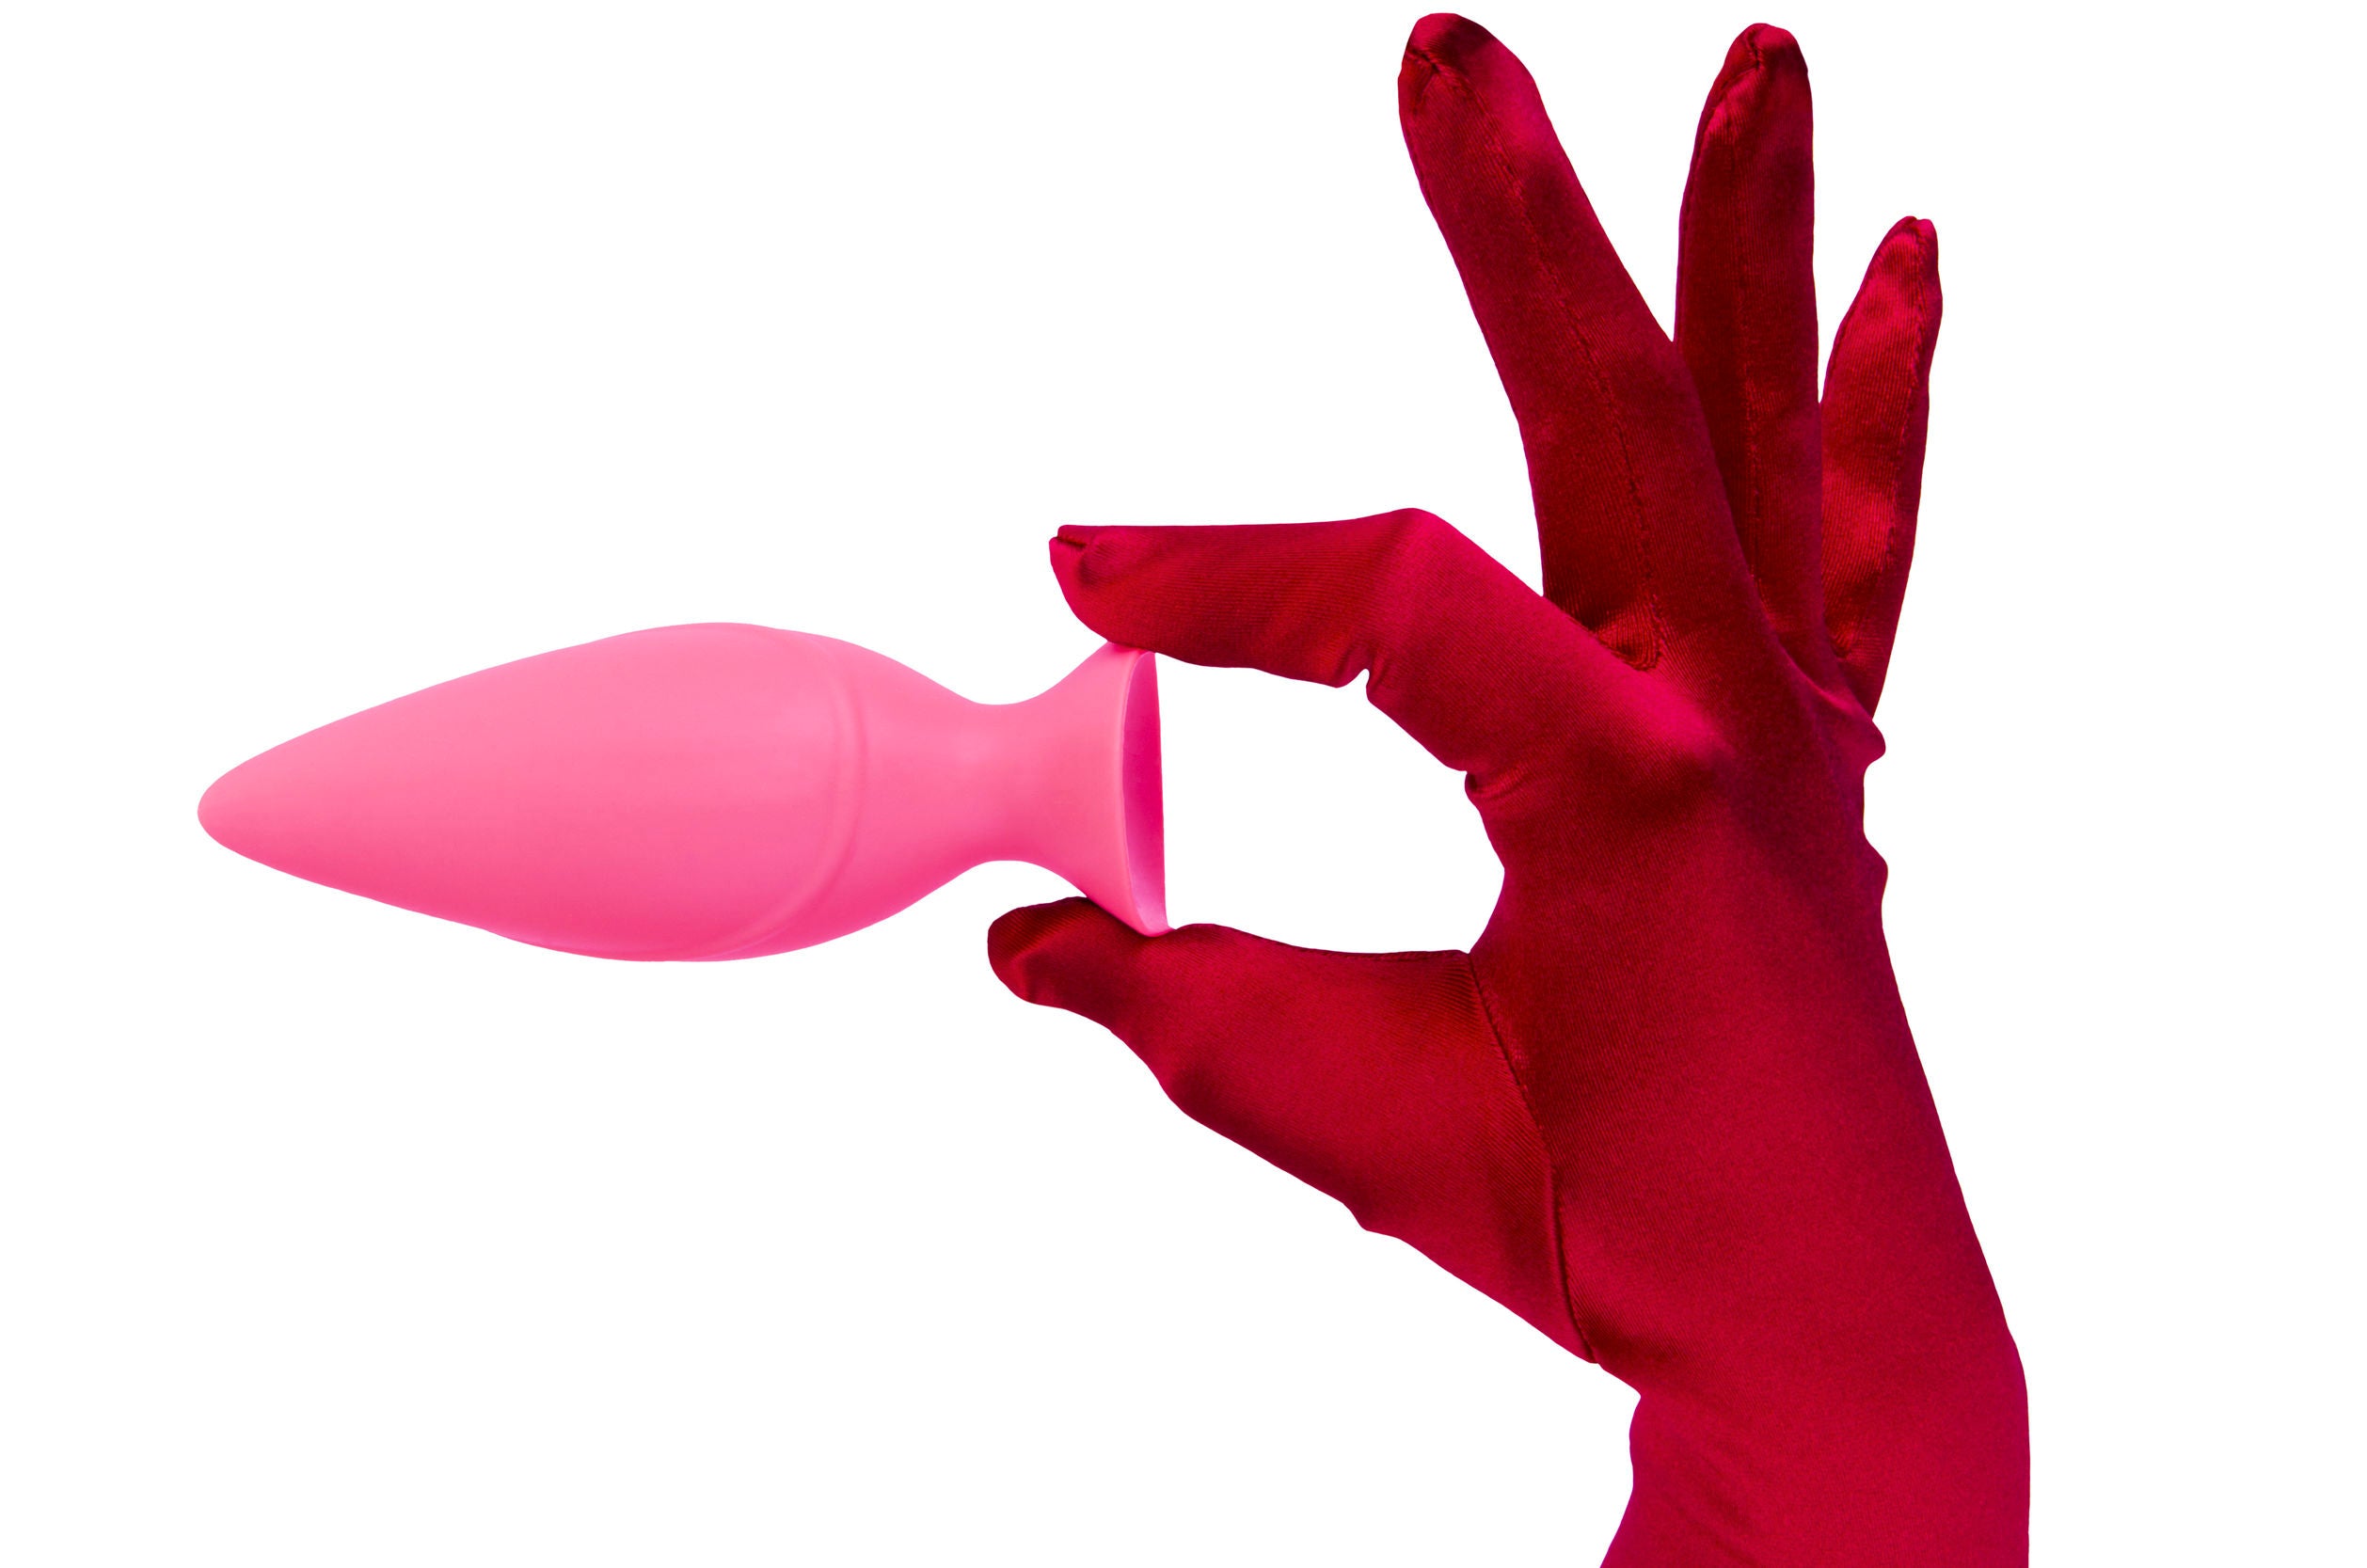 Is Your Sex Toy Toxic?